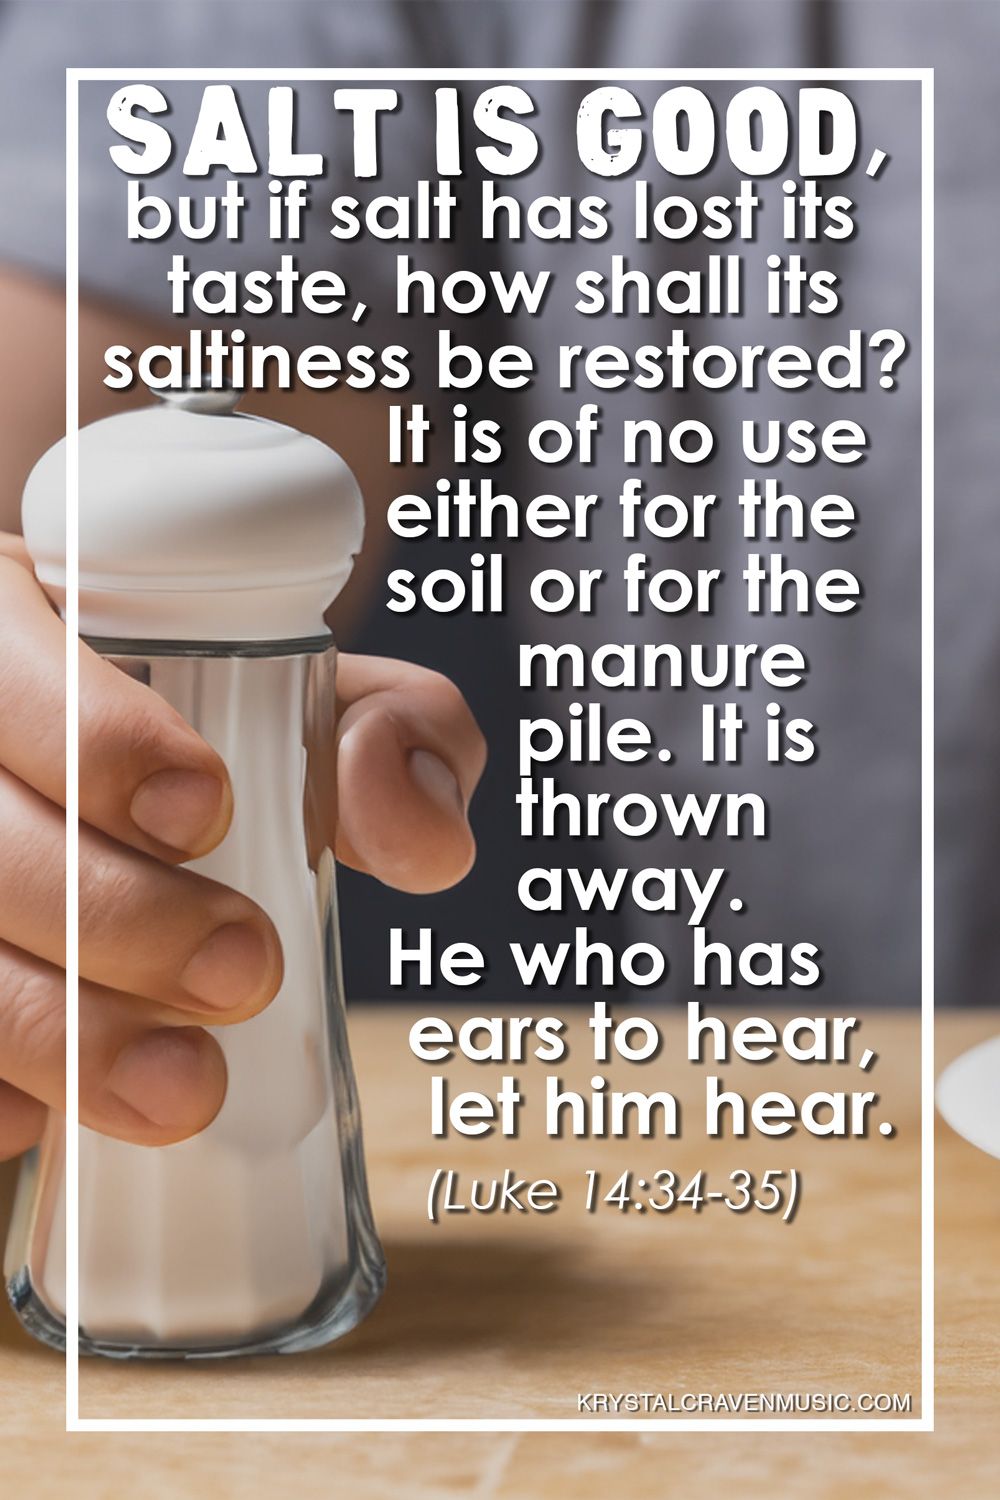 The text from Luke 14:34-35 that reads "Salt is good, but if salt has lost its taste, how shall its saltiness be restored? It is of no use either for the soil or for the manure pile. It is thrown away. He who has ears to hear, let him hear." over a hand holding a filled salt shaker on a table.